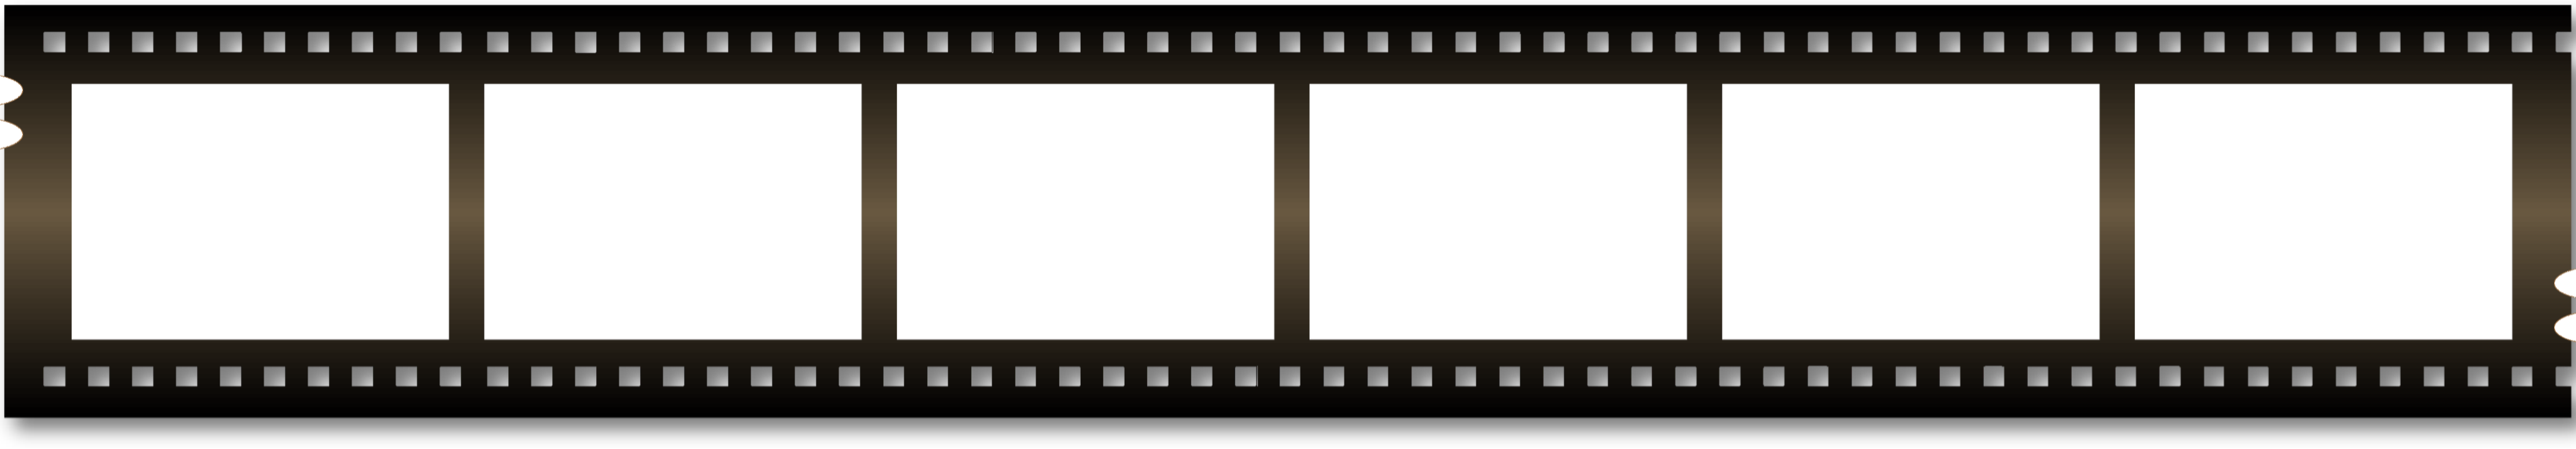 download-movie-reel-gallery-for-blank-film-strip-clipart-png-free